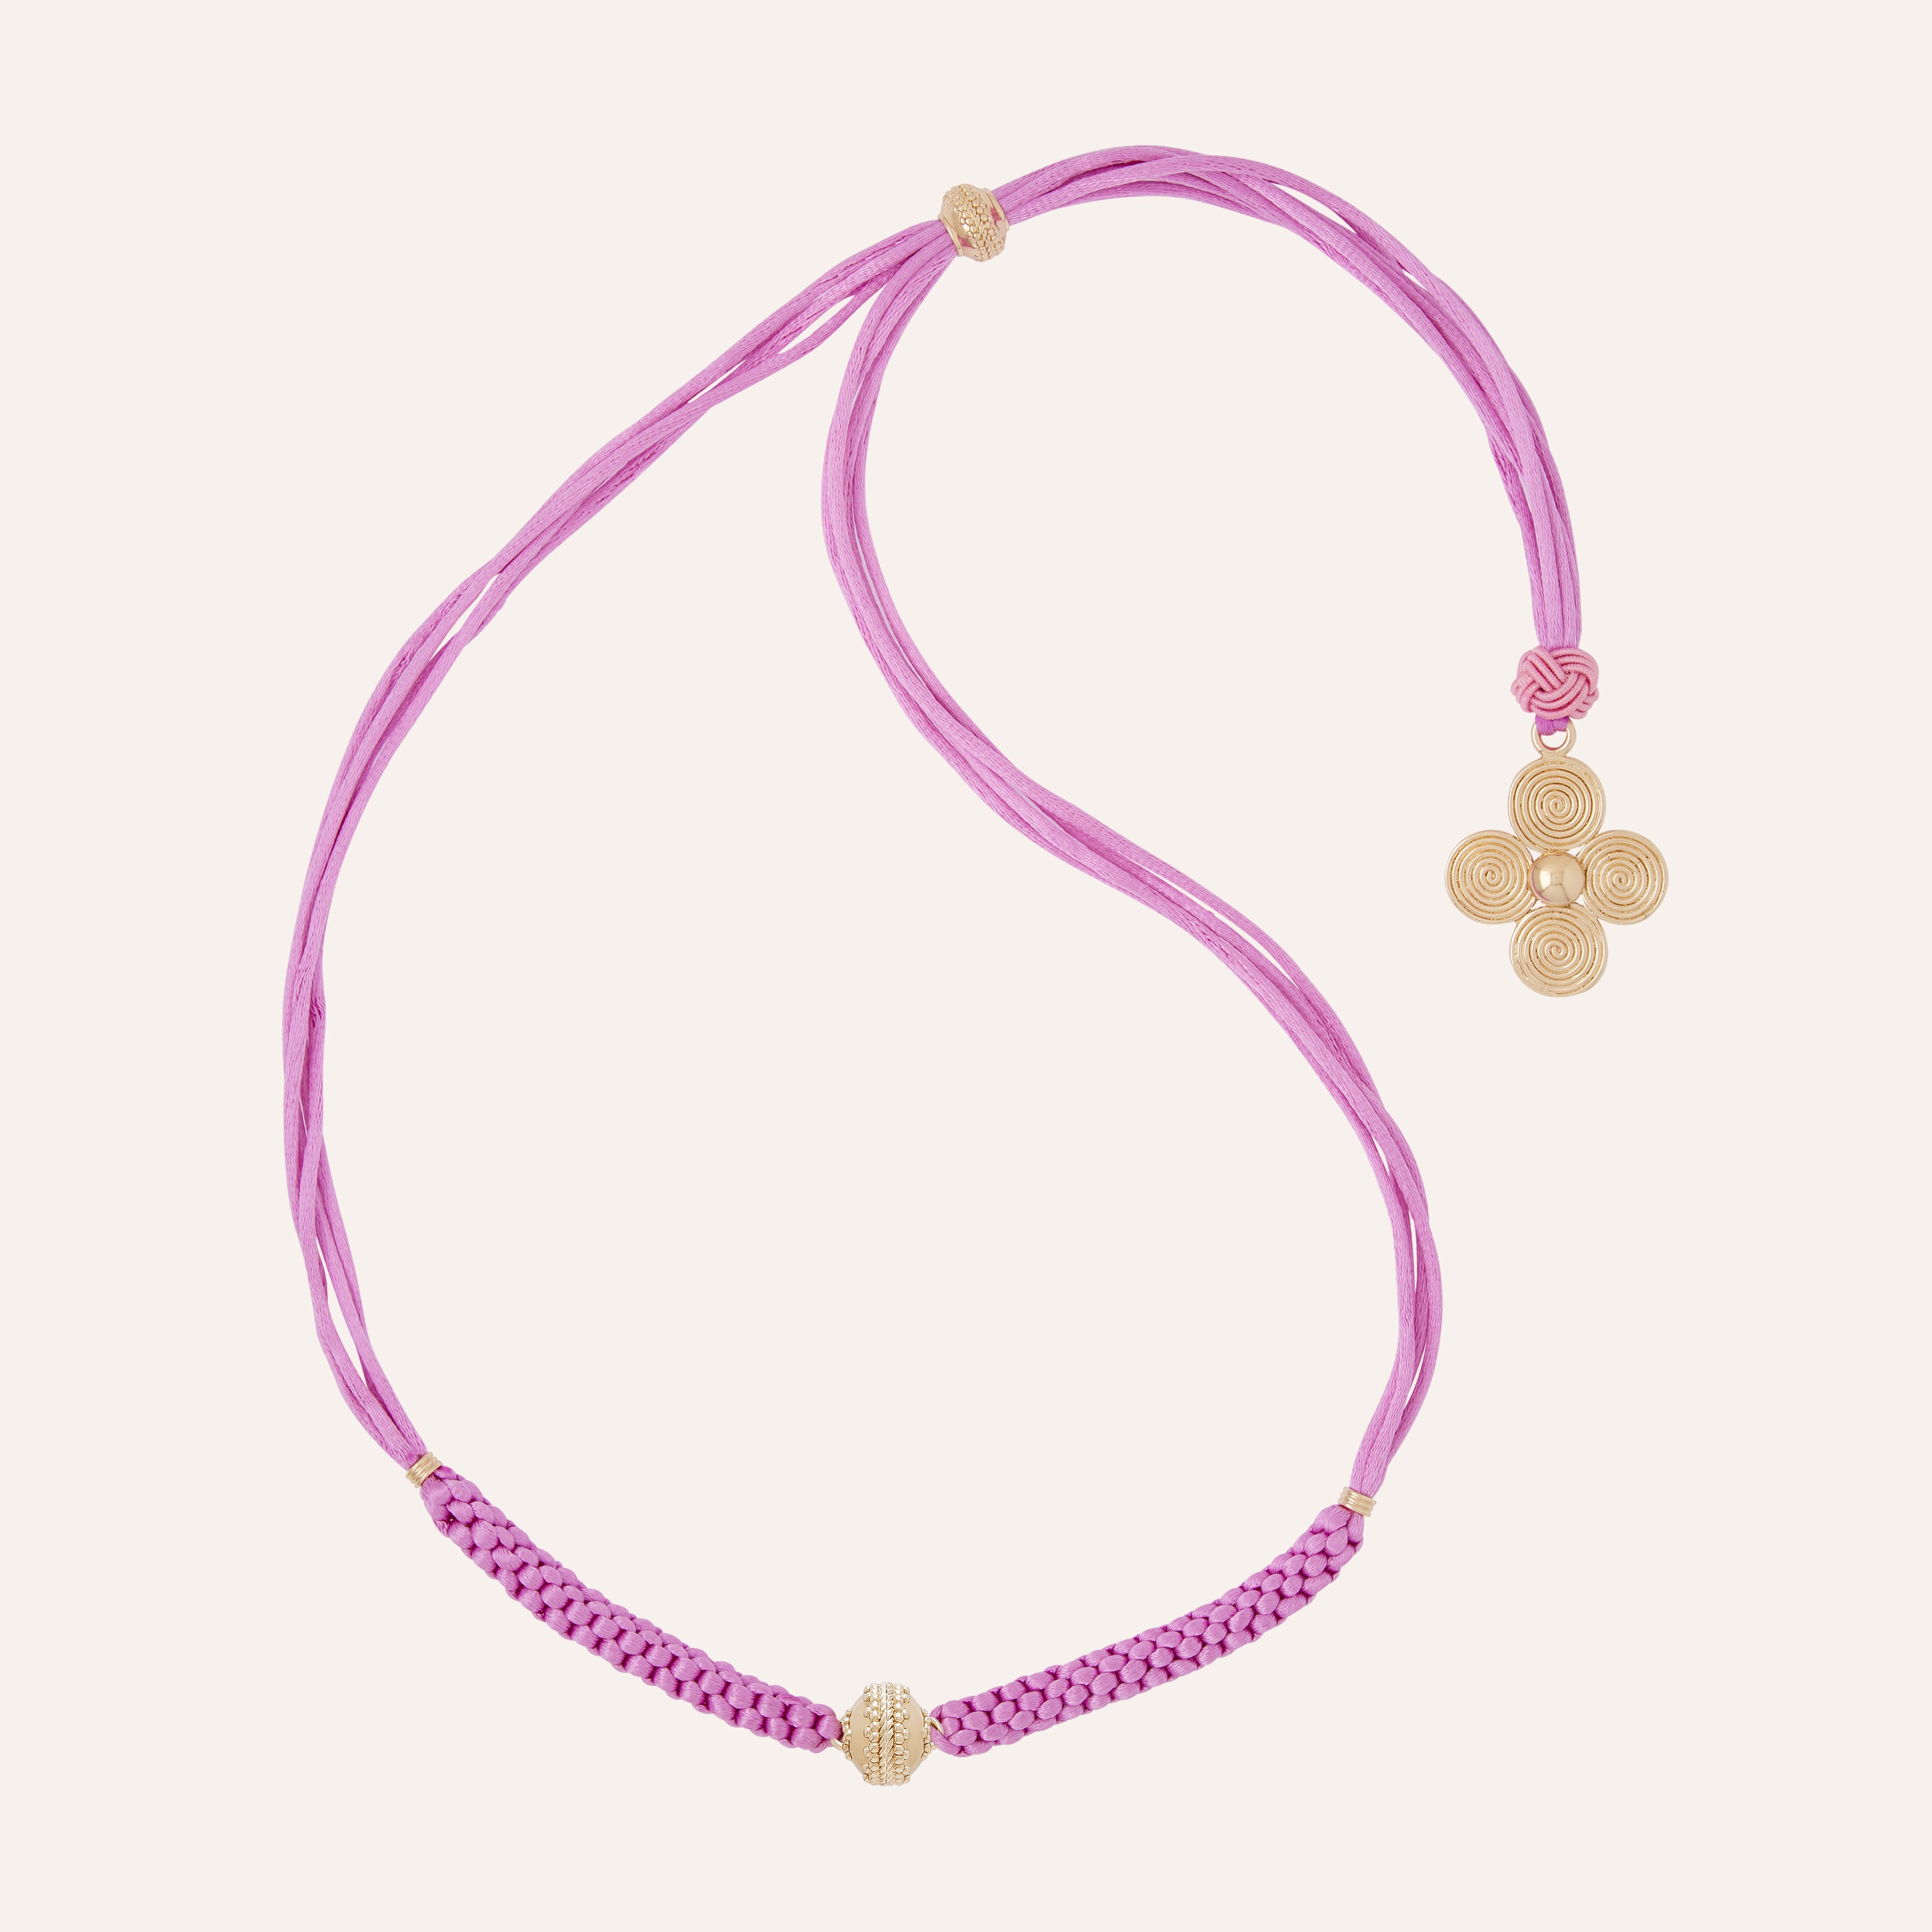 Knotted Heritage Petal Lilac Necklace